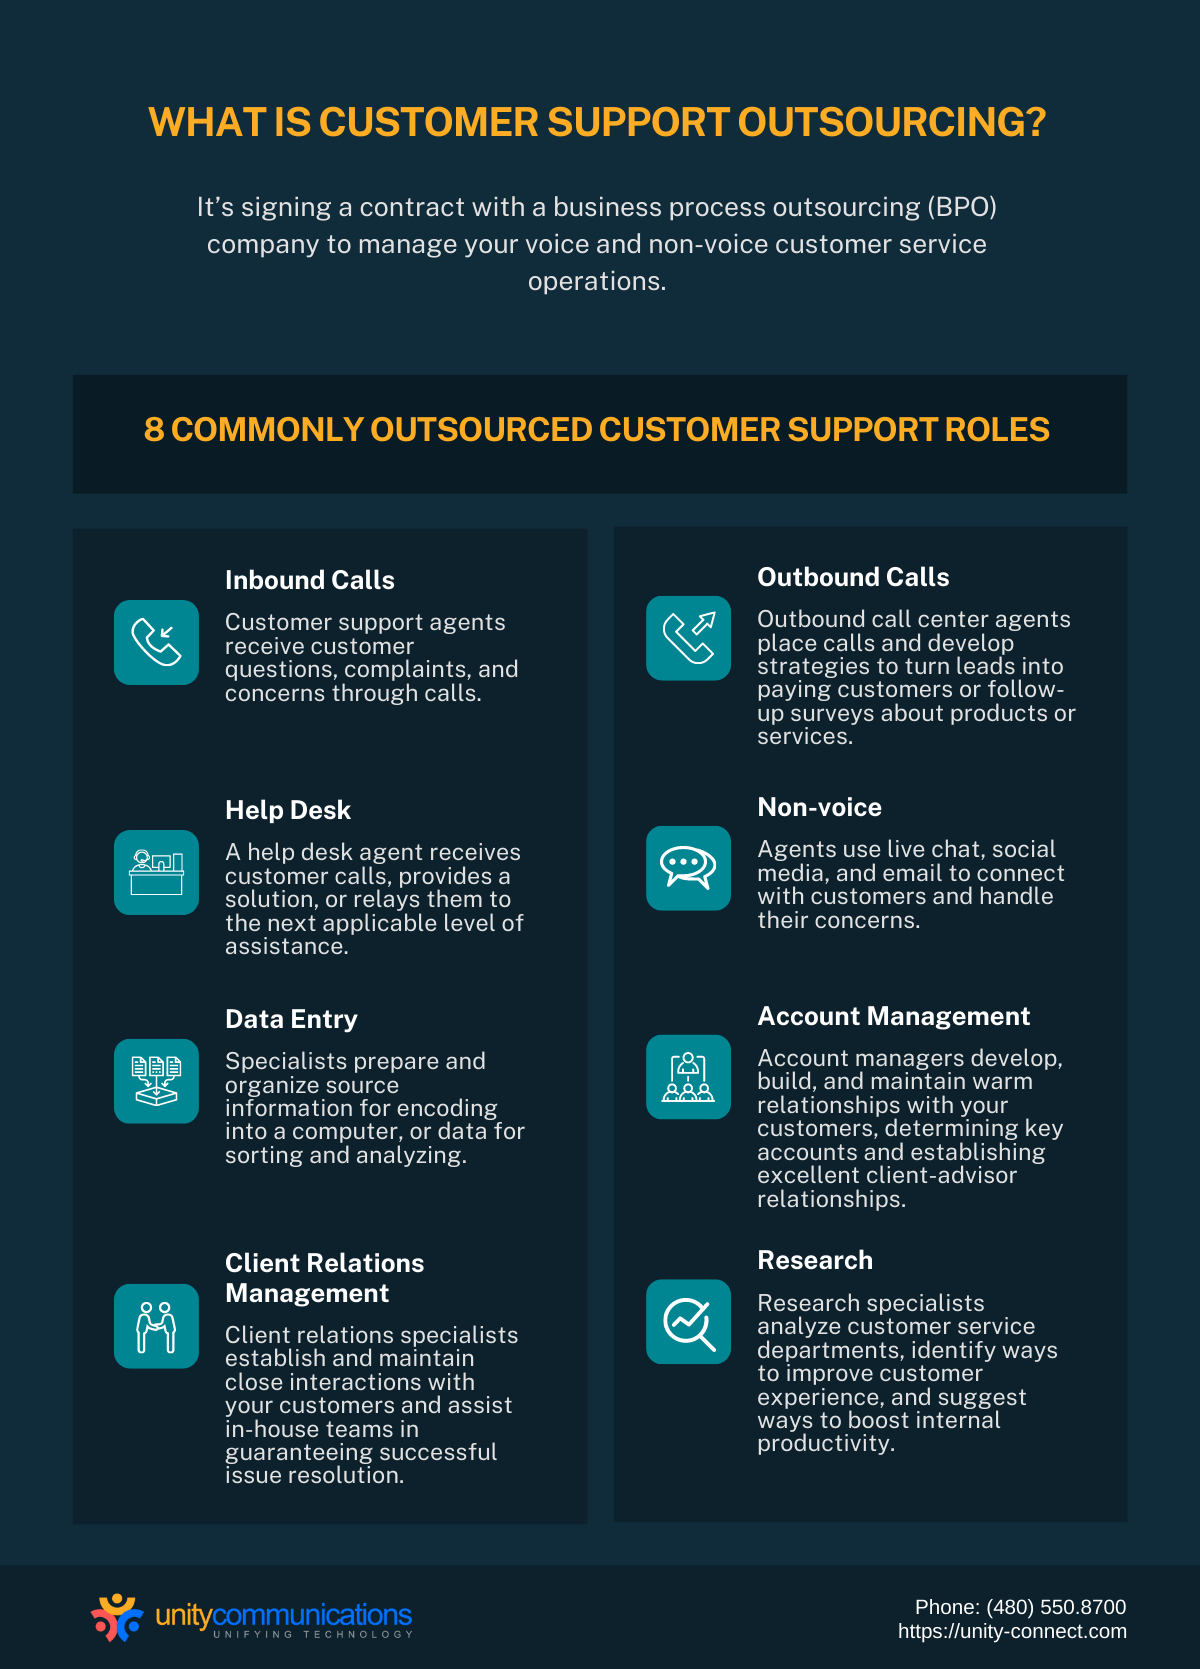 Short Infographic: What is customer support outsourcing